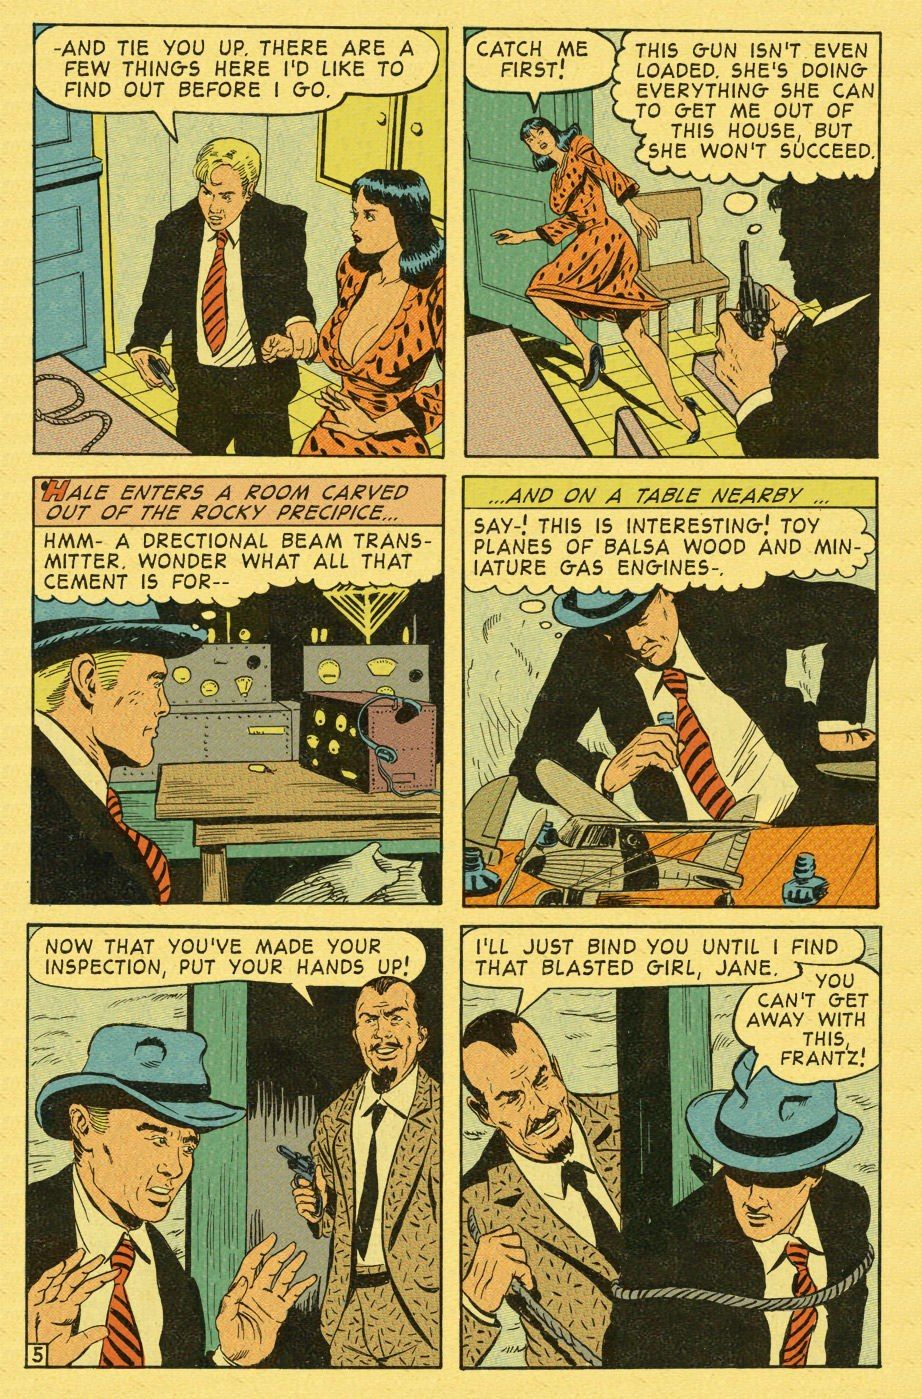 Crime Smashers Part 1 The Wertham Files page 16